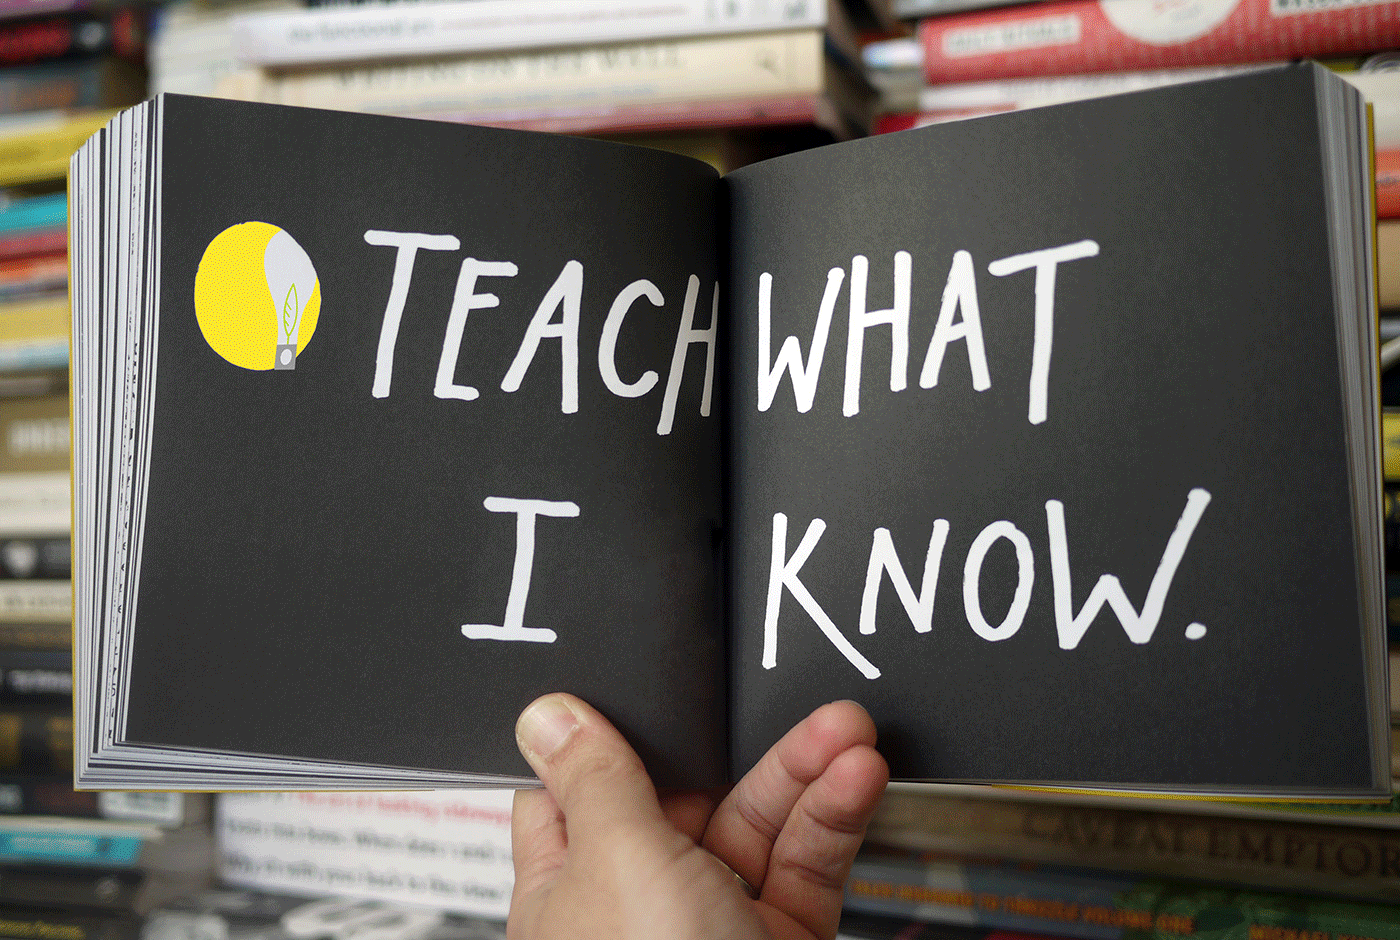 Teach what I know